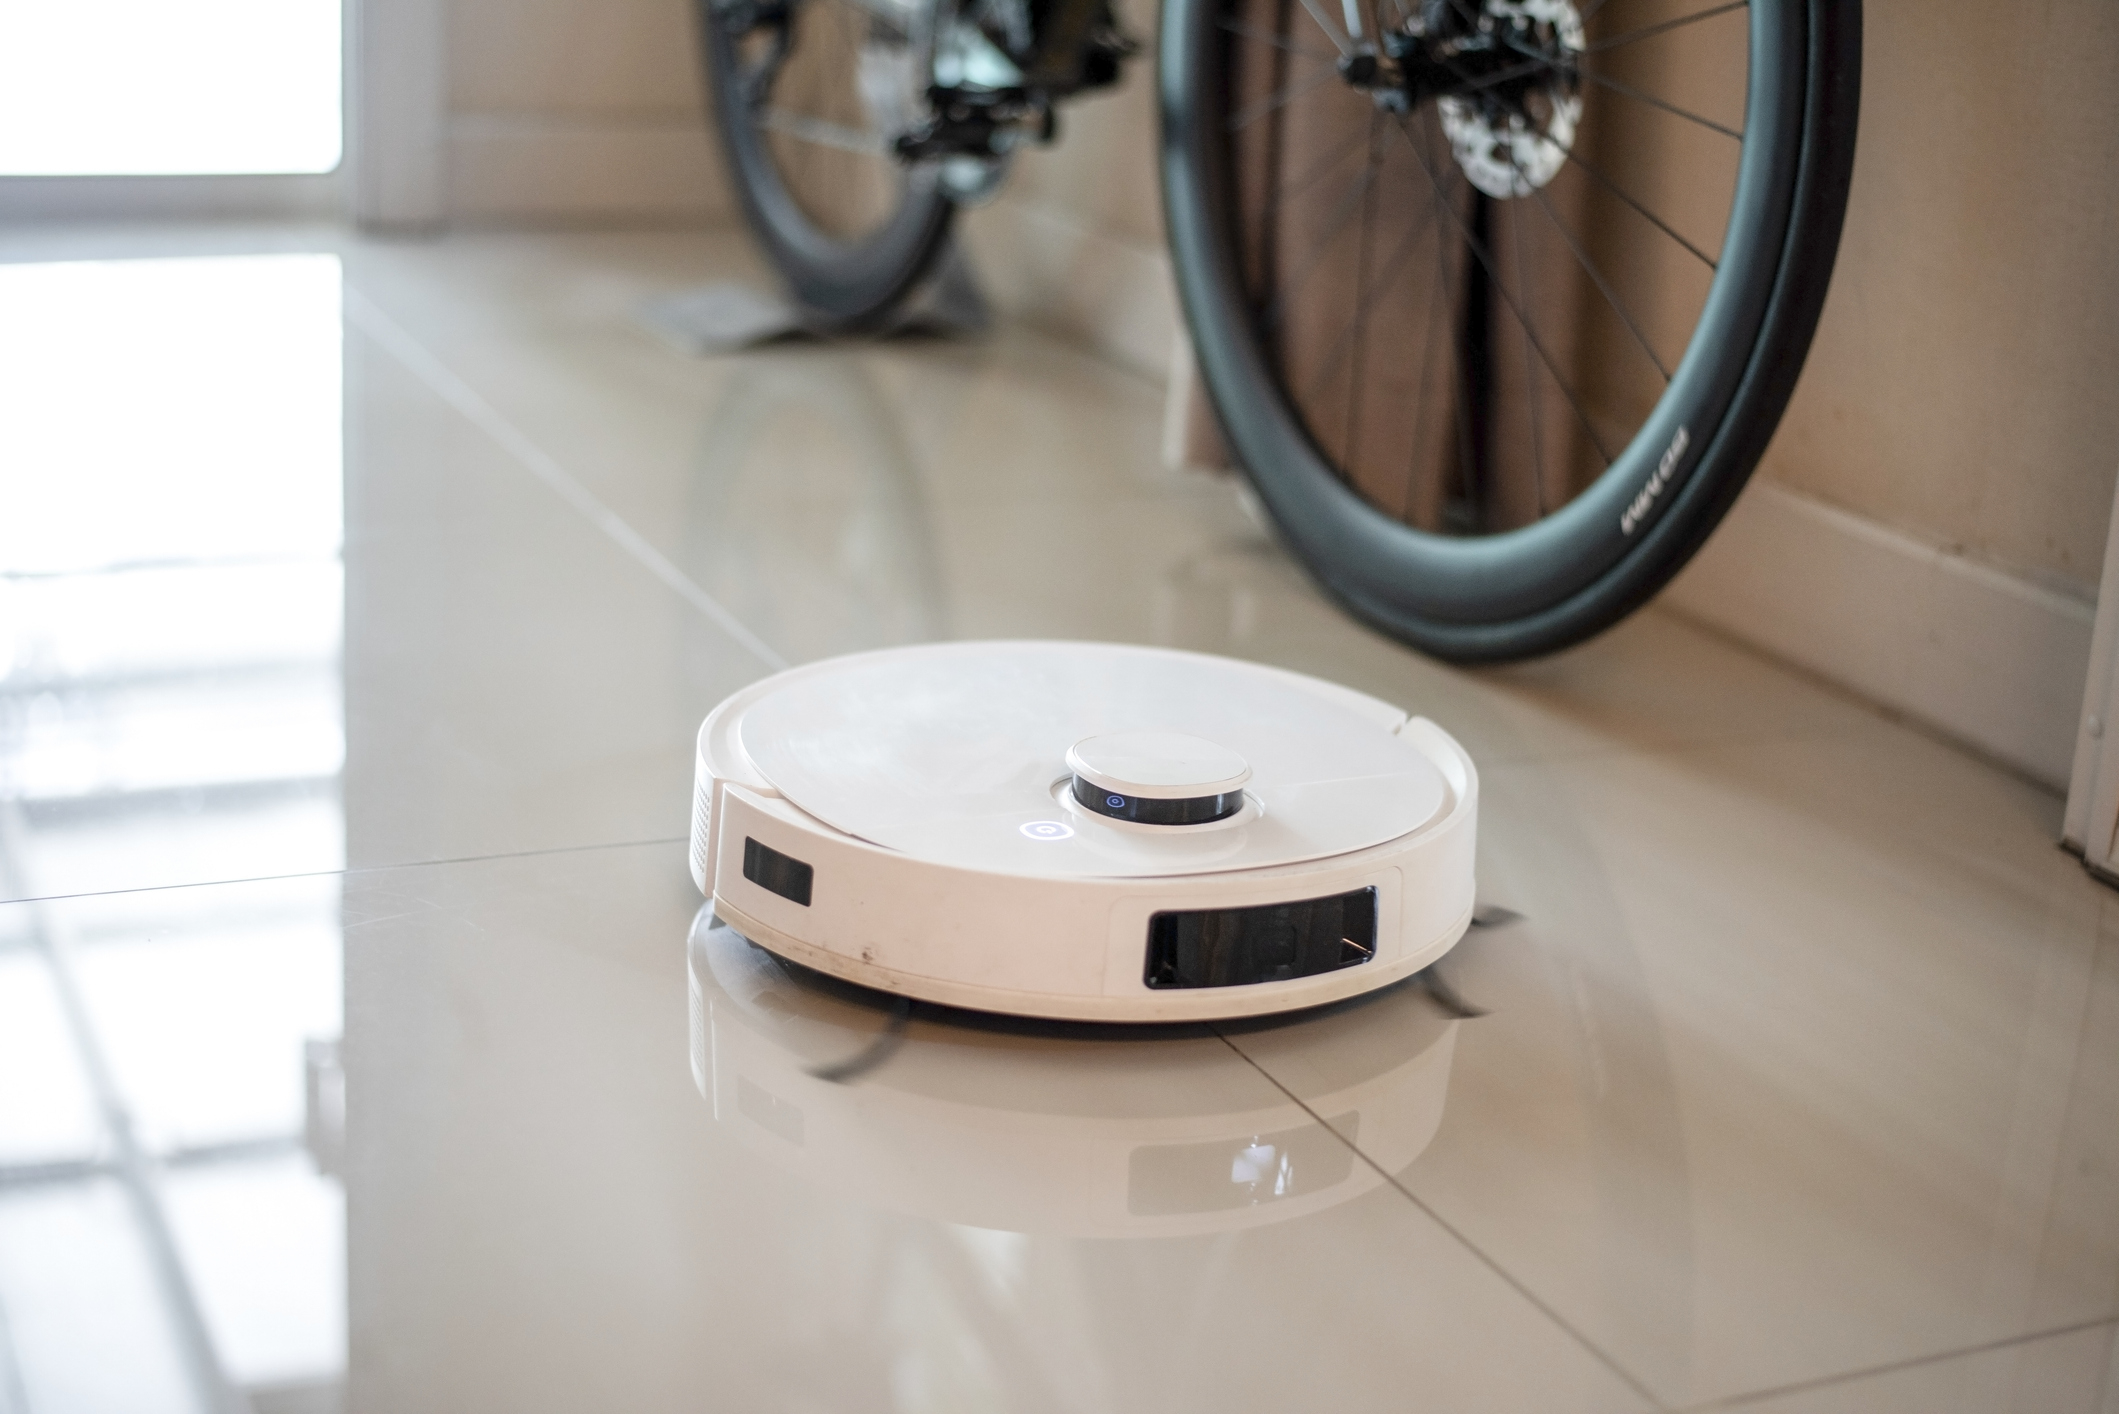 A robotic vacuum cleans the tiled floor with a bike mounted on the wall in the background